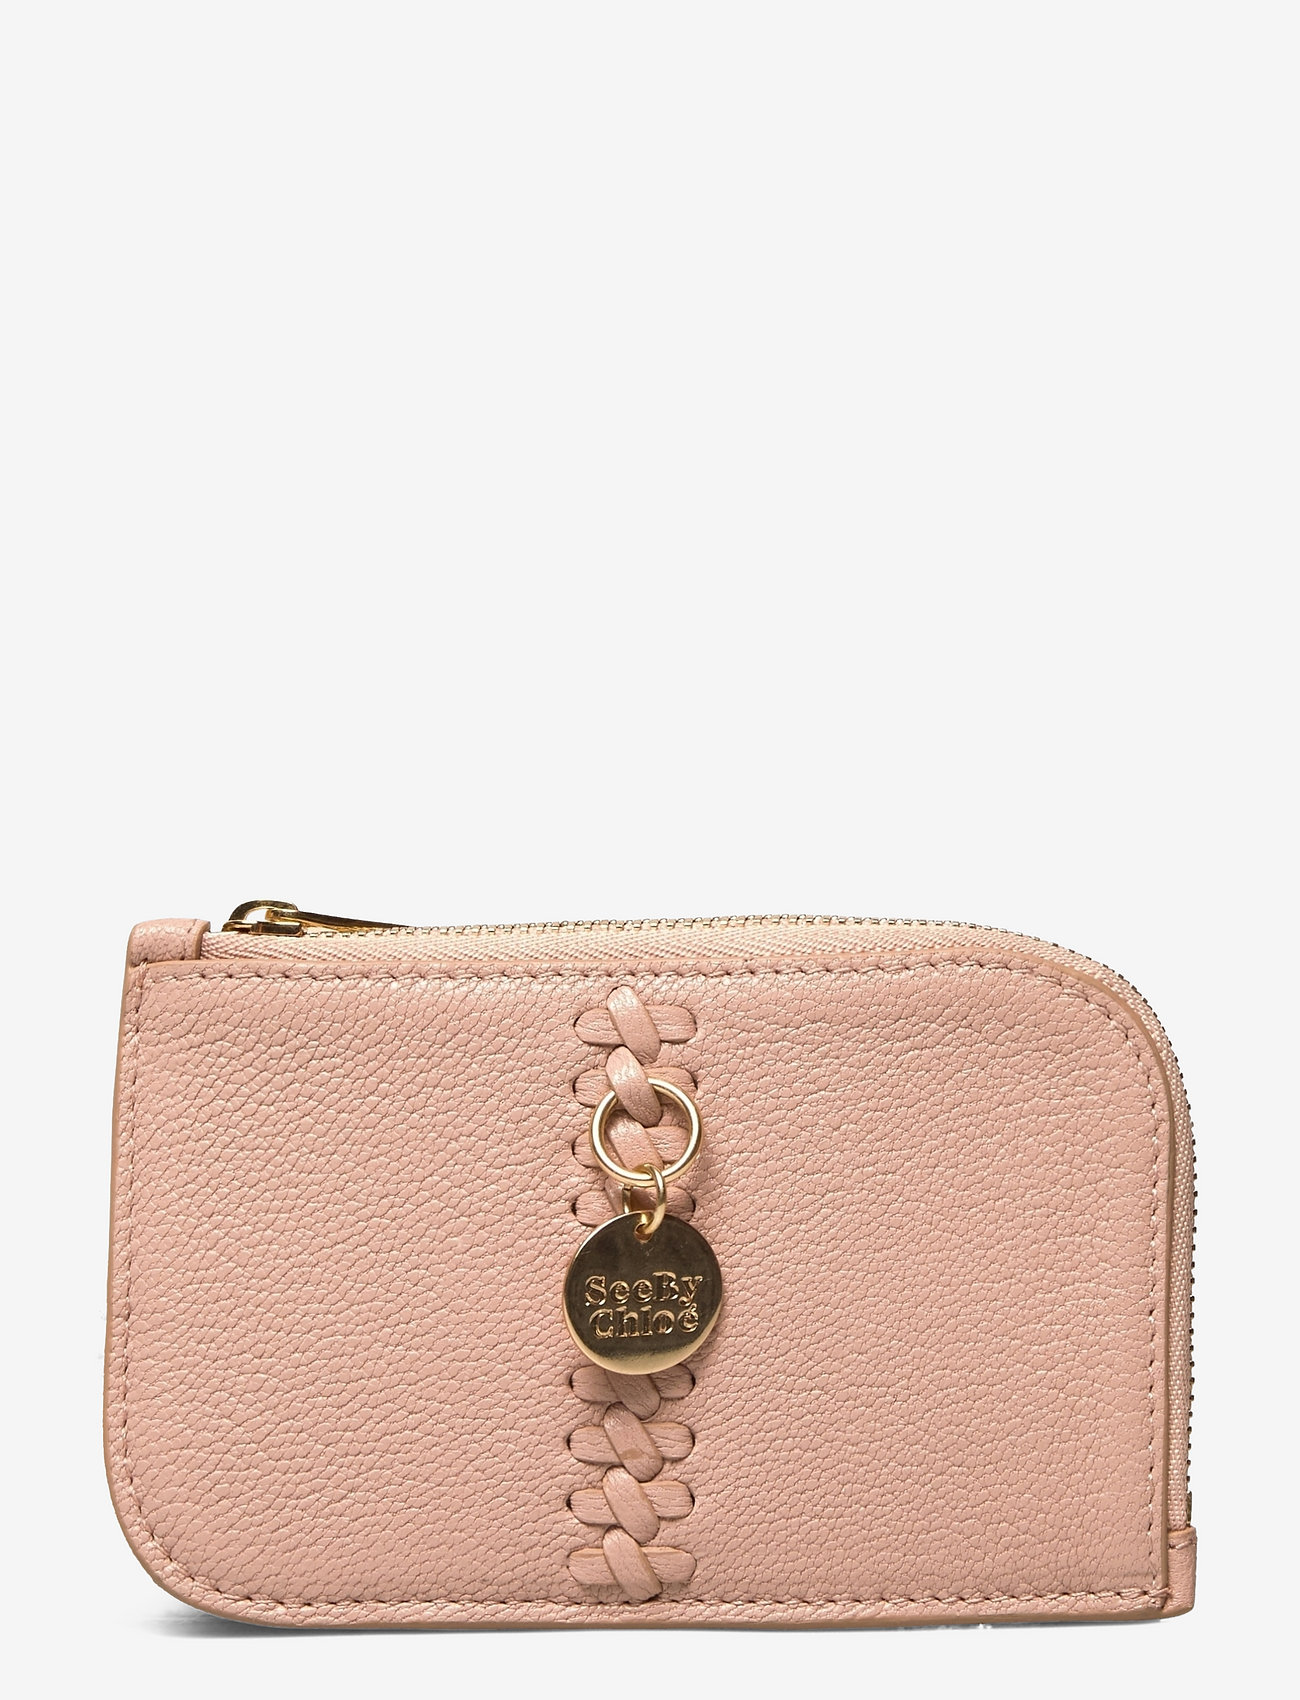 See by Chloé - COMPACT WALLETS - kaarthouders - powder - 0